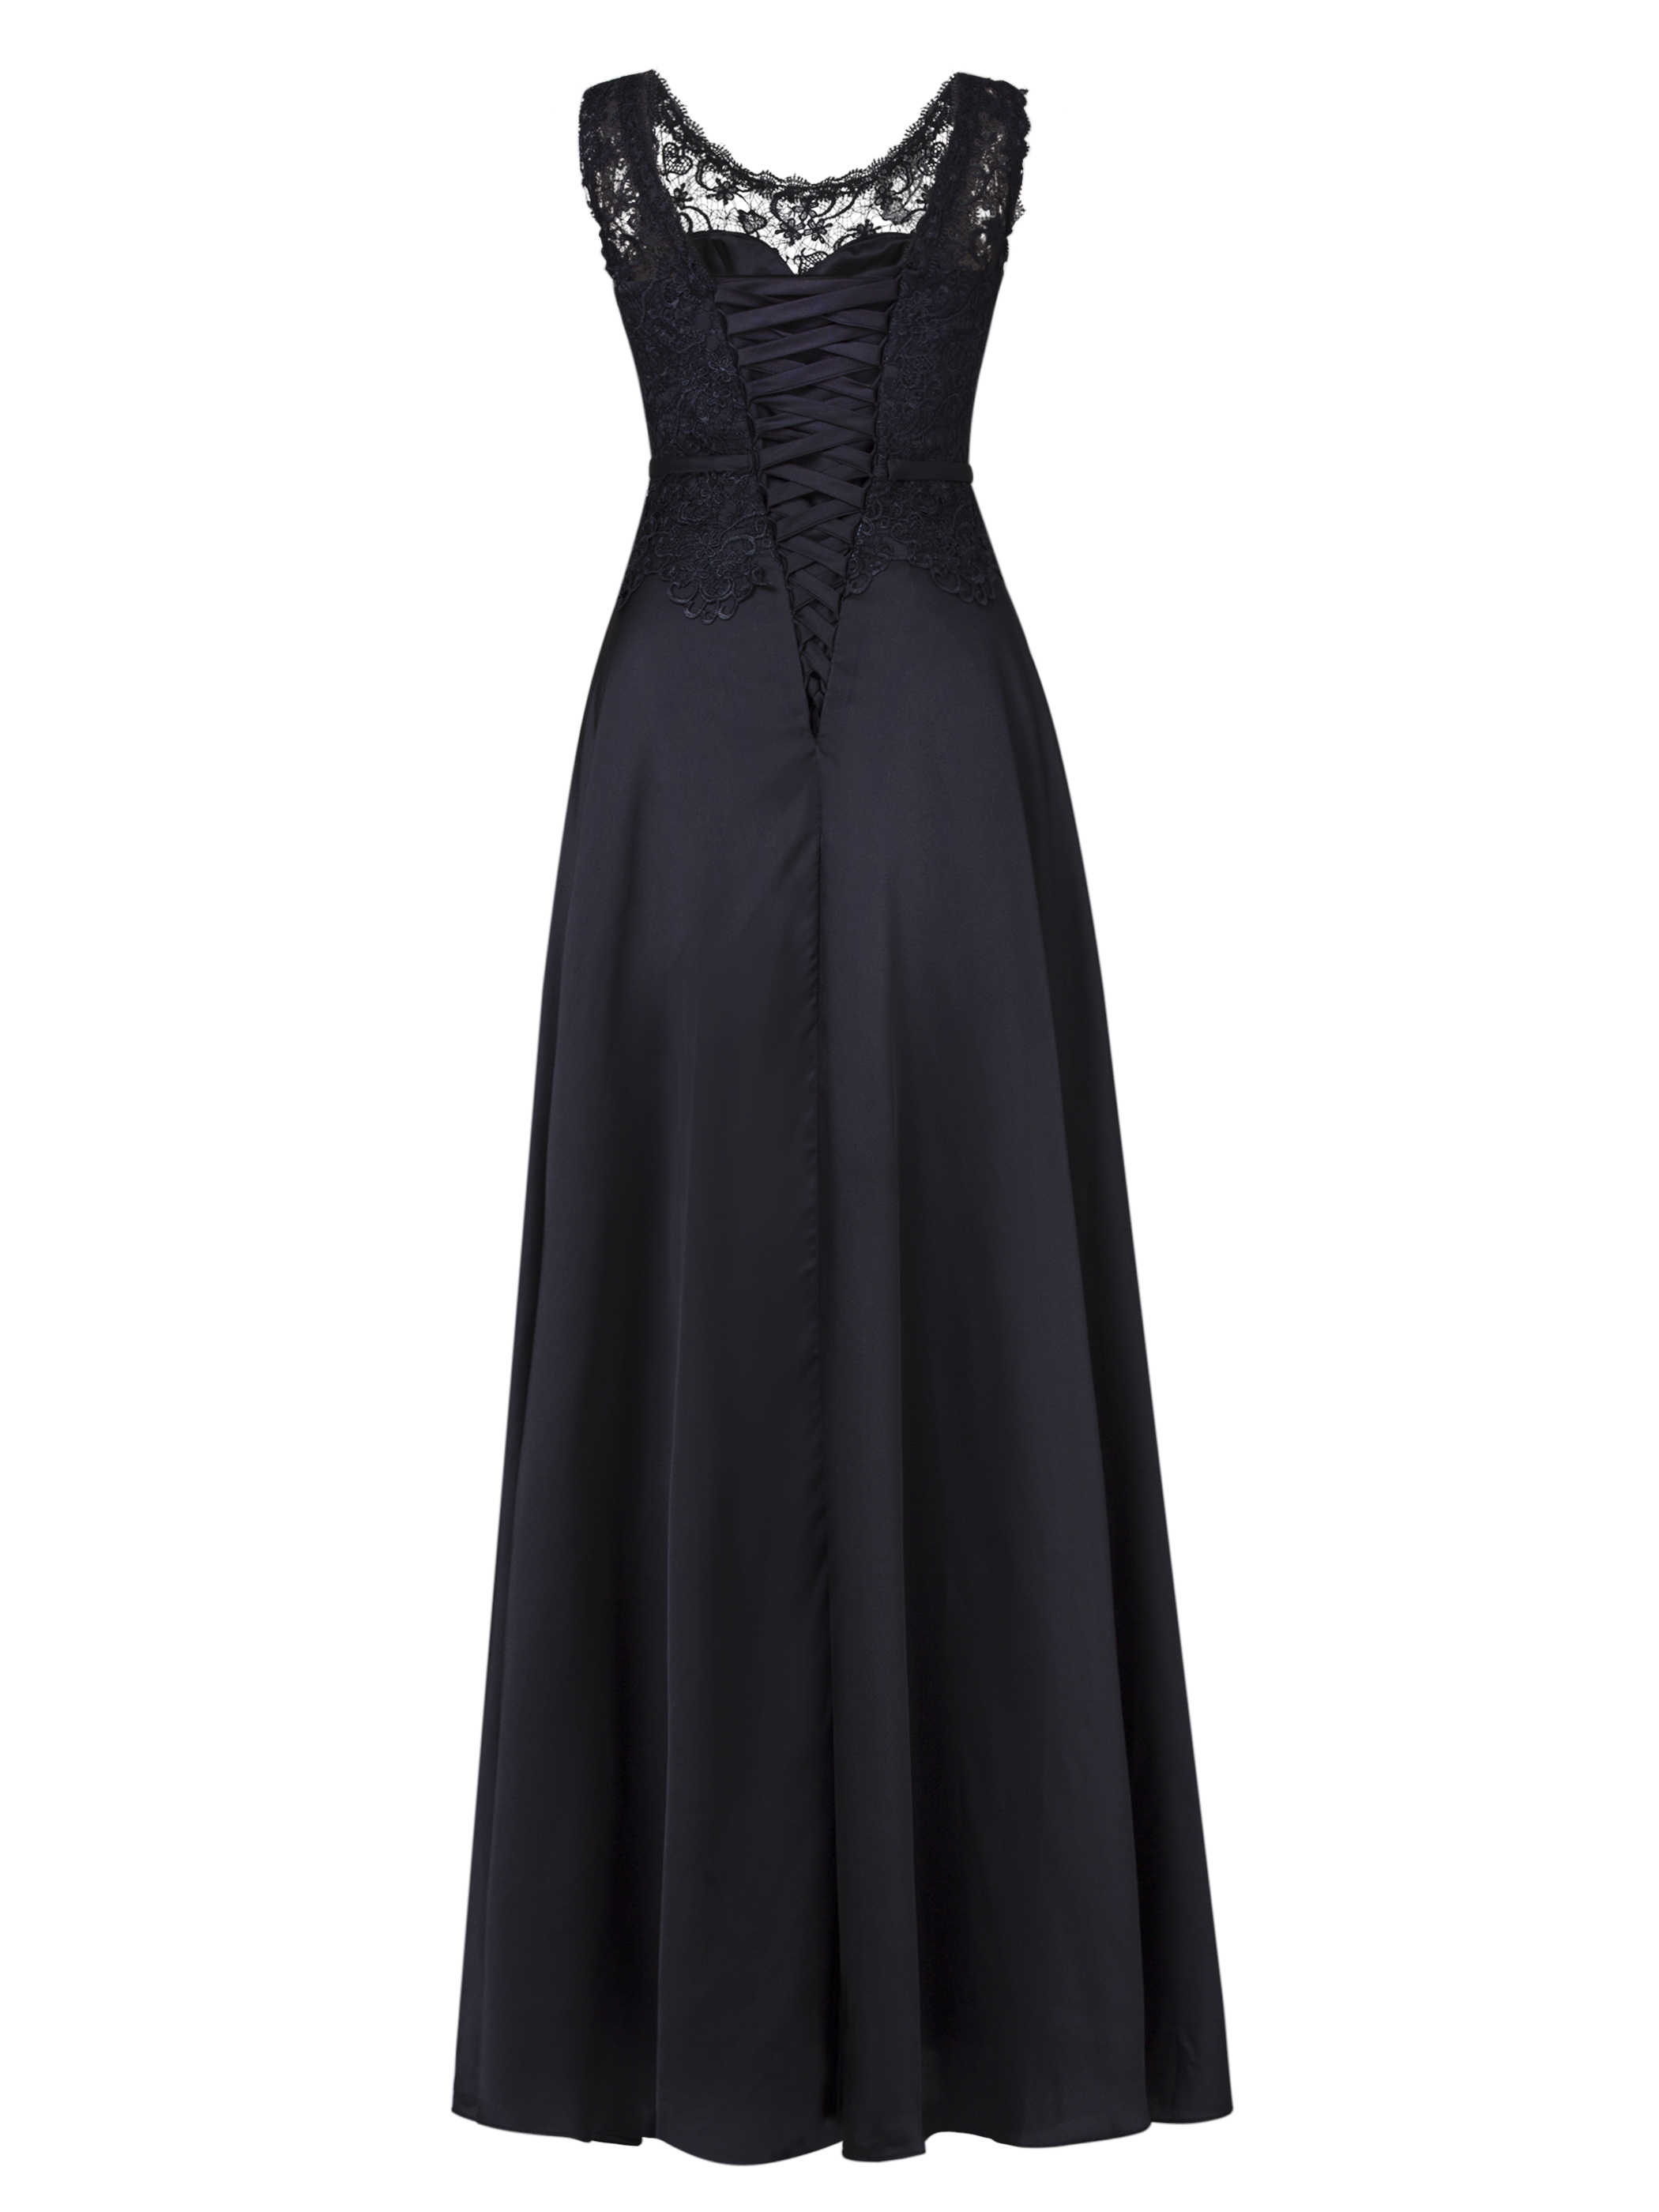 Ericdress Scoop Neck Lace-Up Ankle-Length Lace Evening Dress